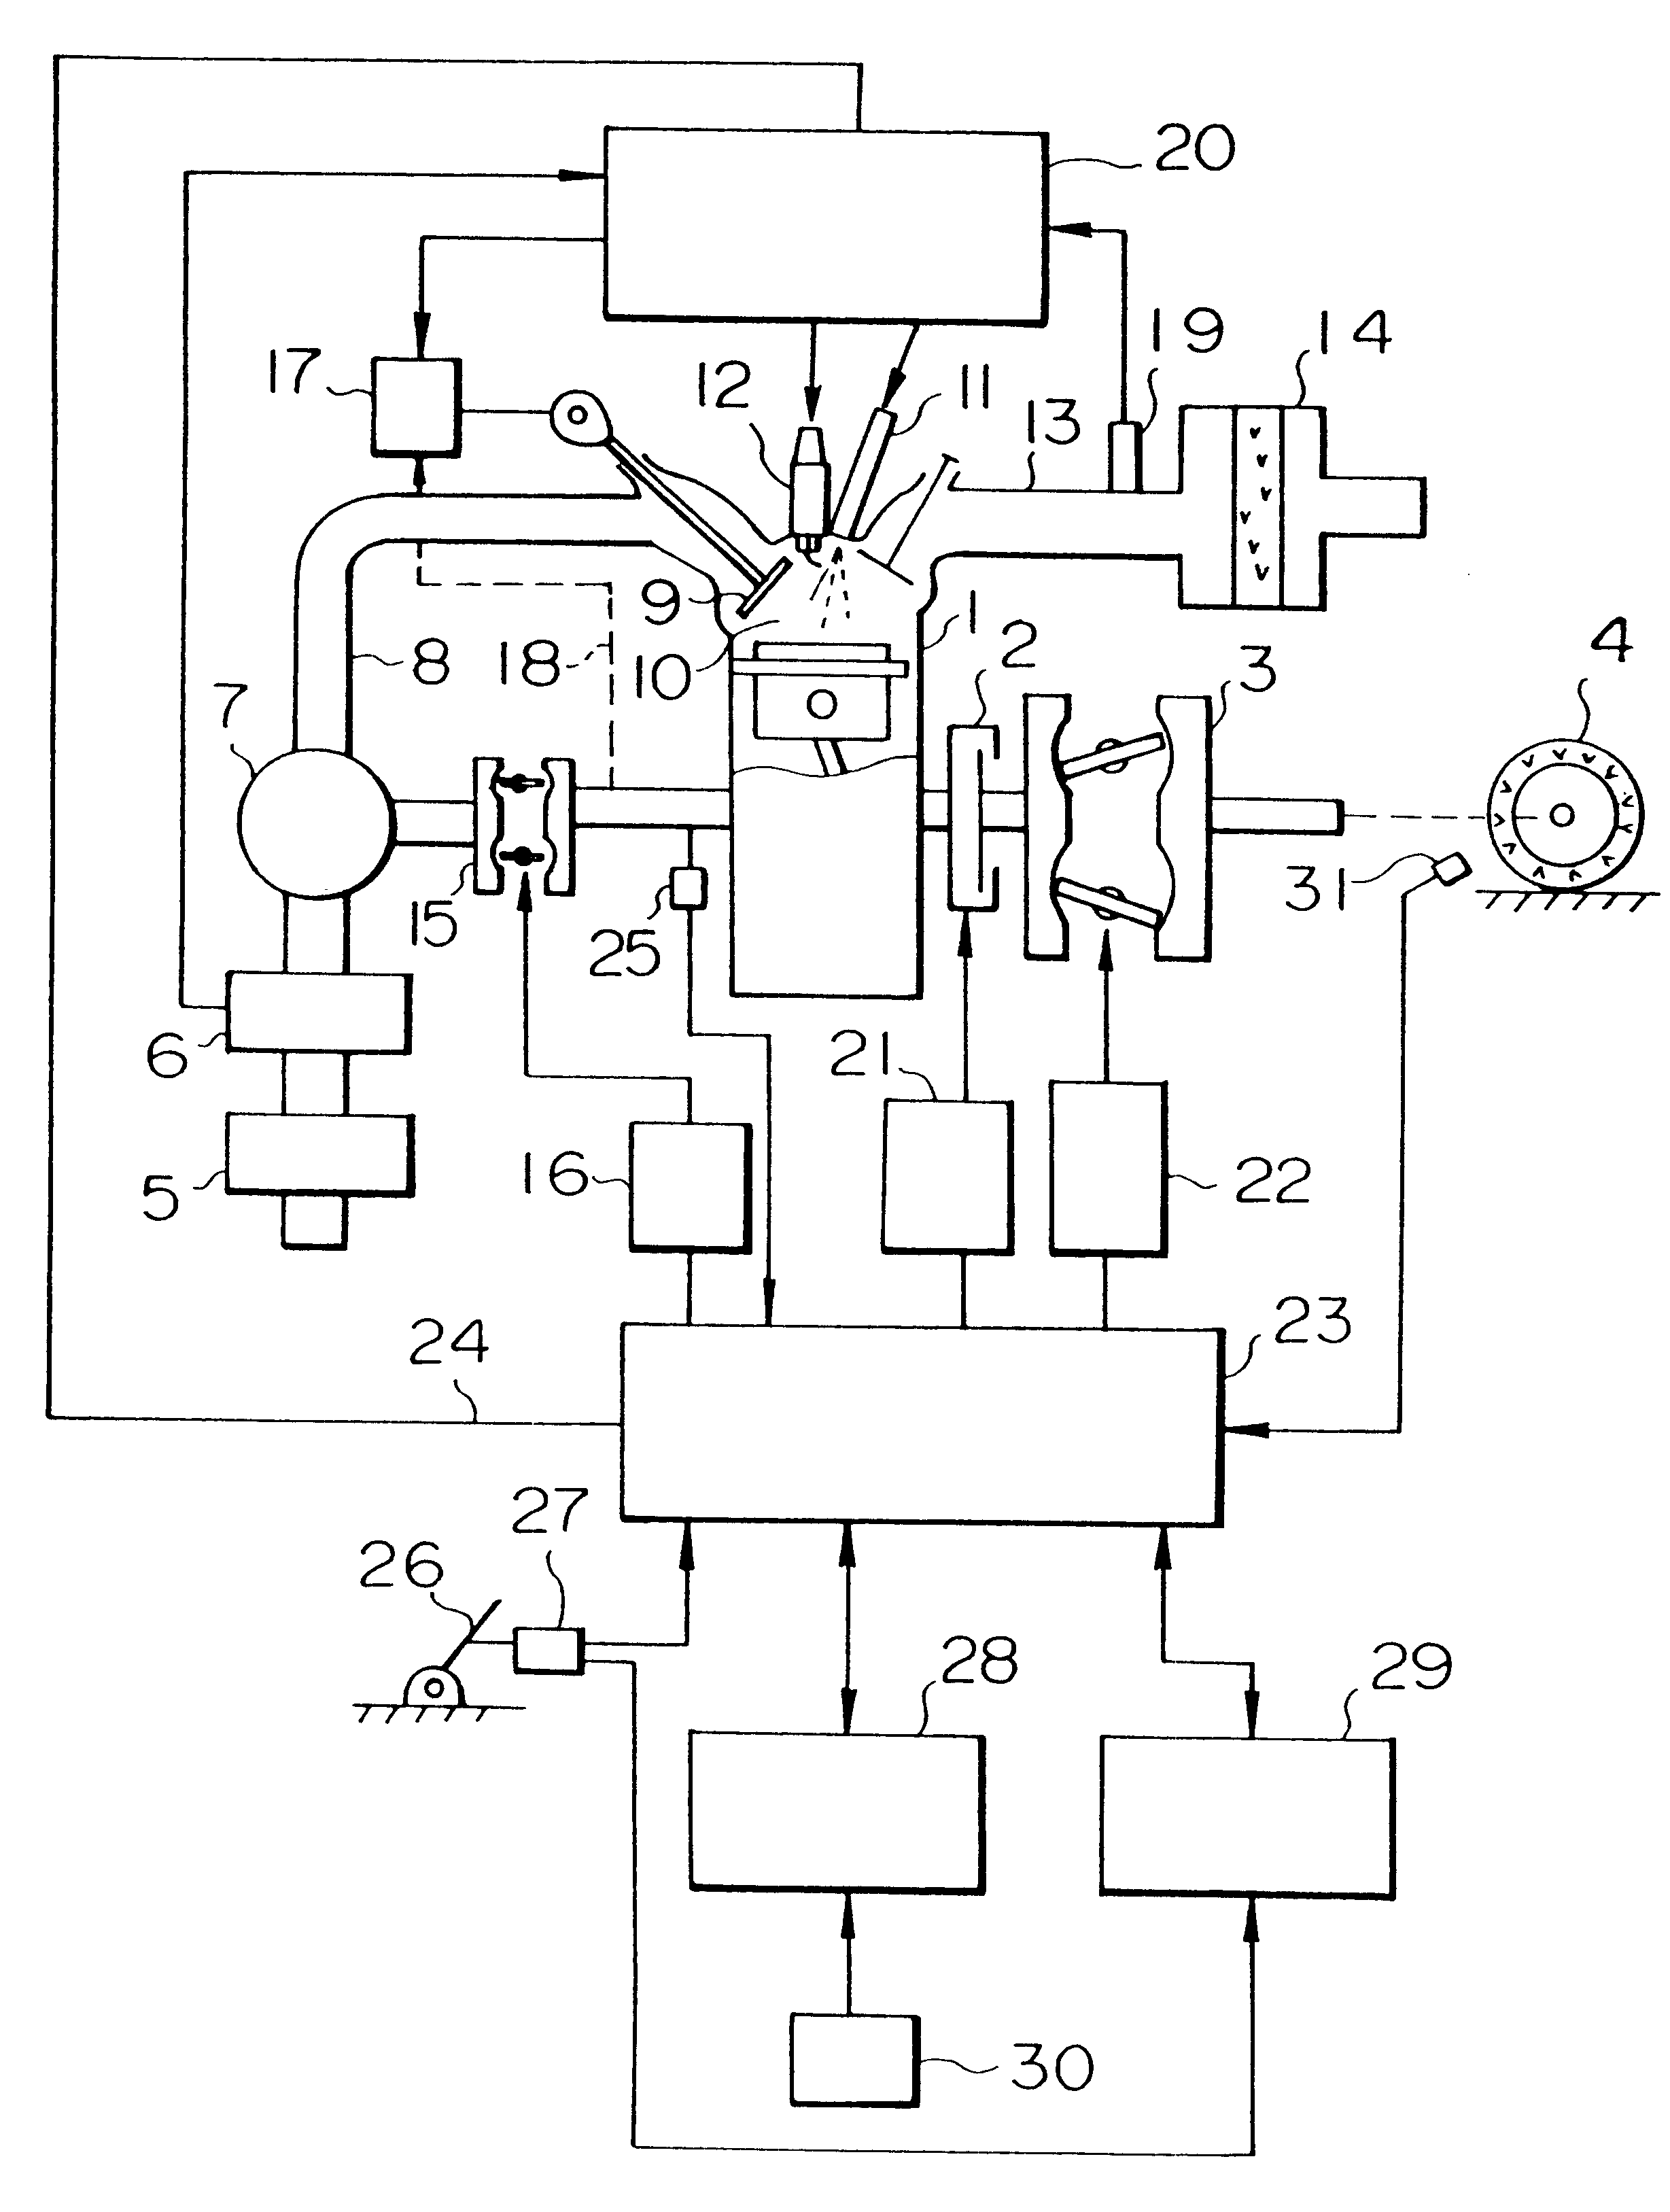 Control apparatus for drive system